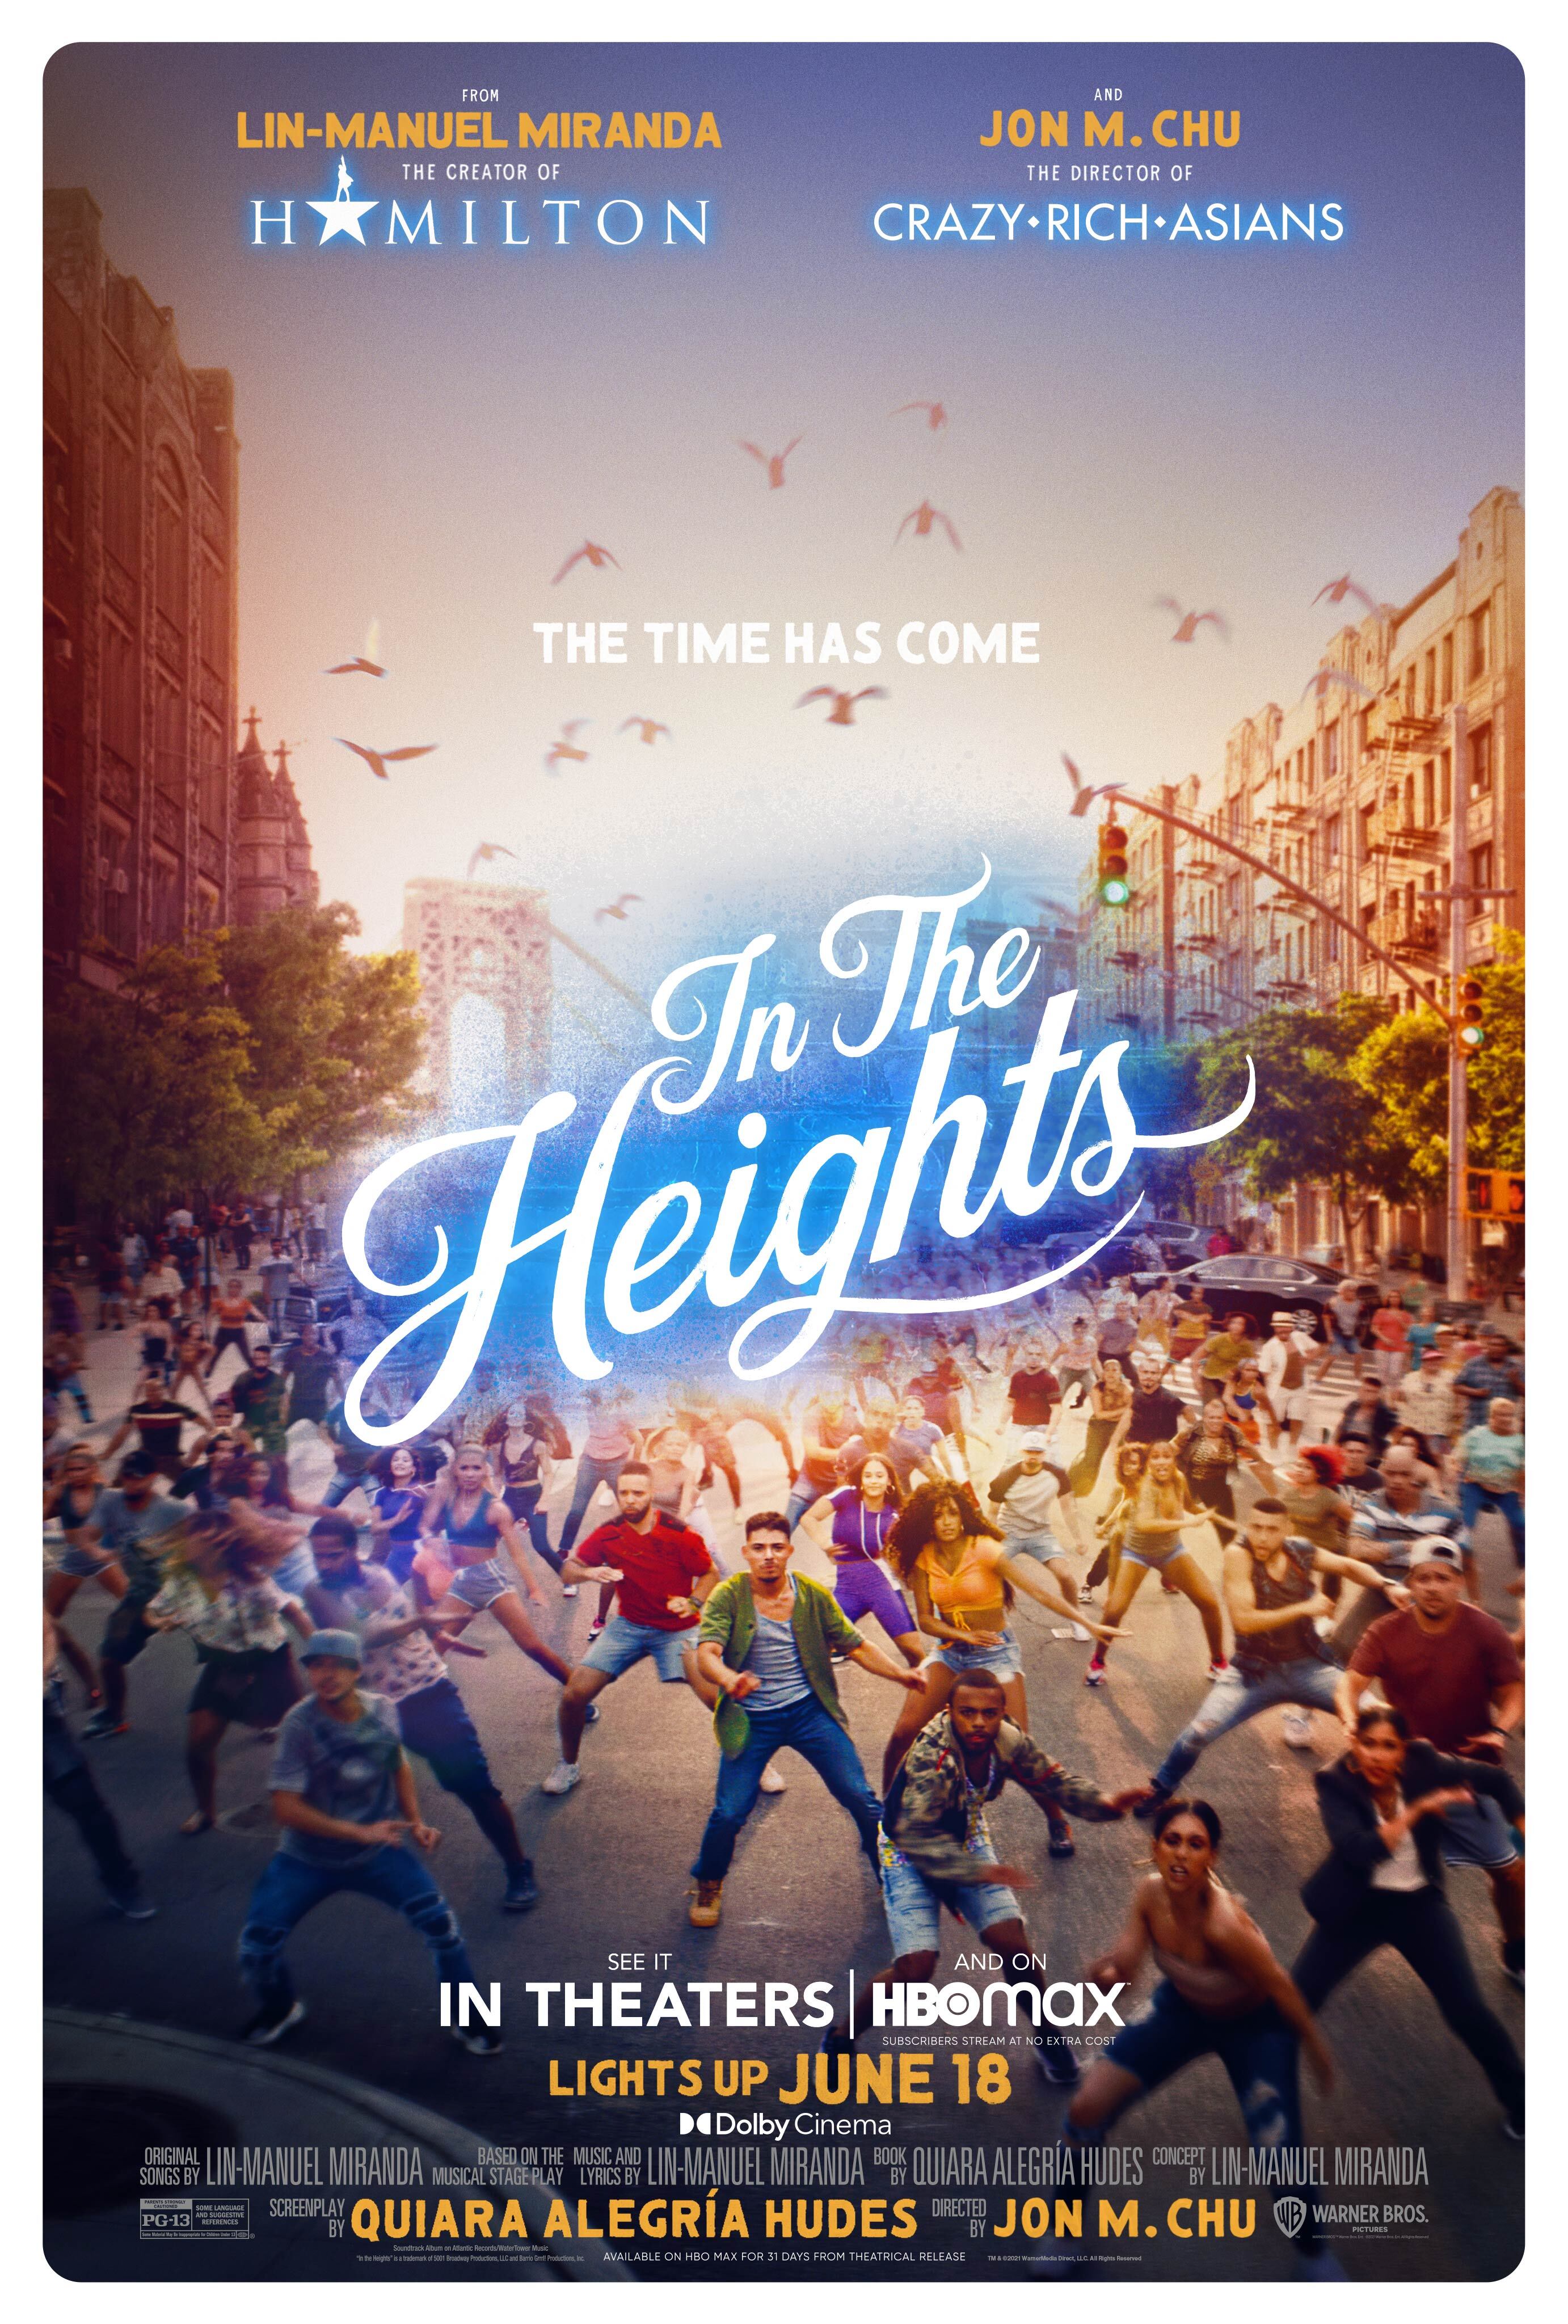 New In the Heights movie poster of people dancing in the street